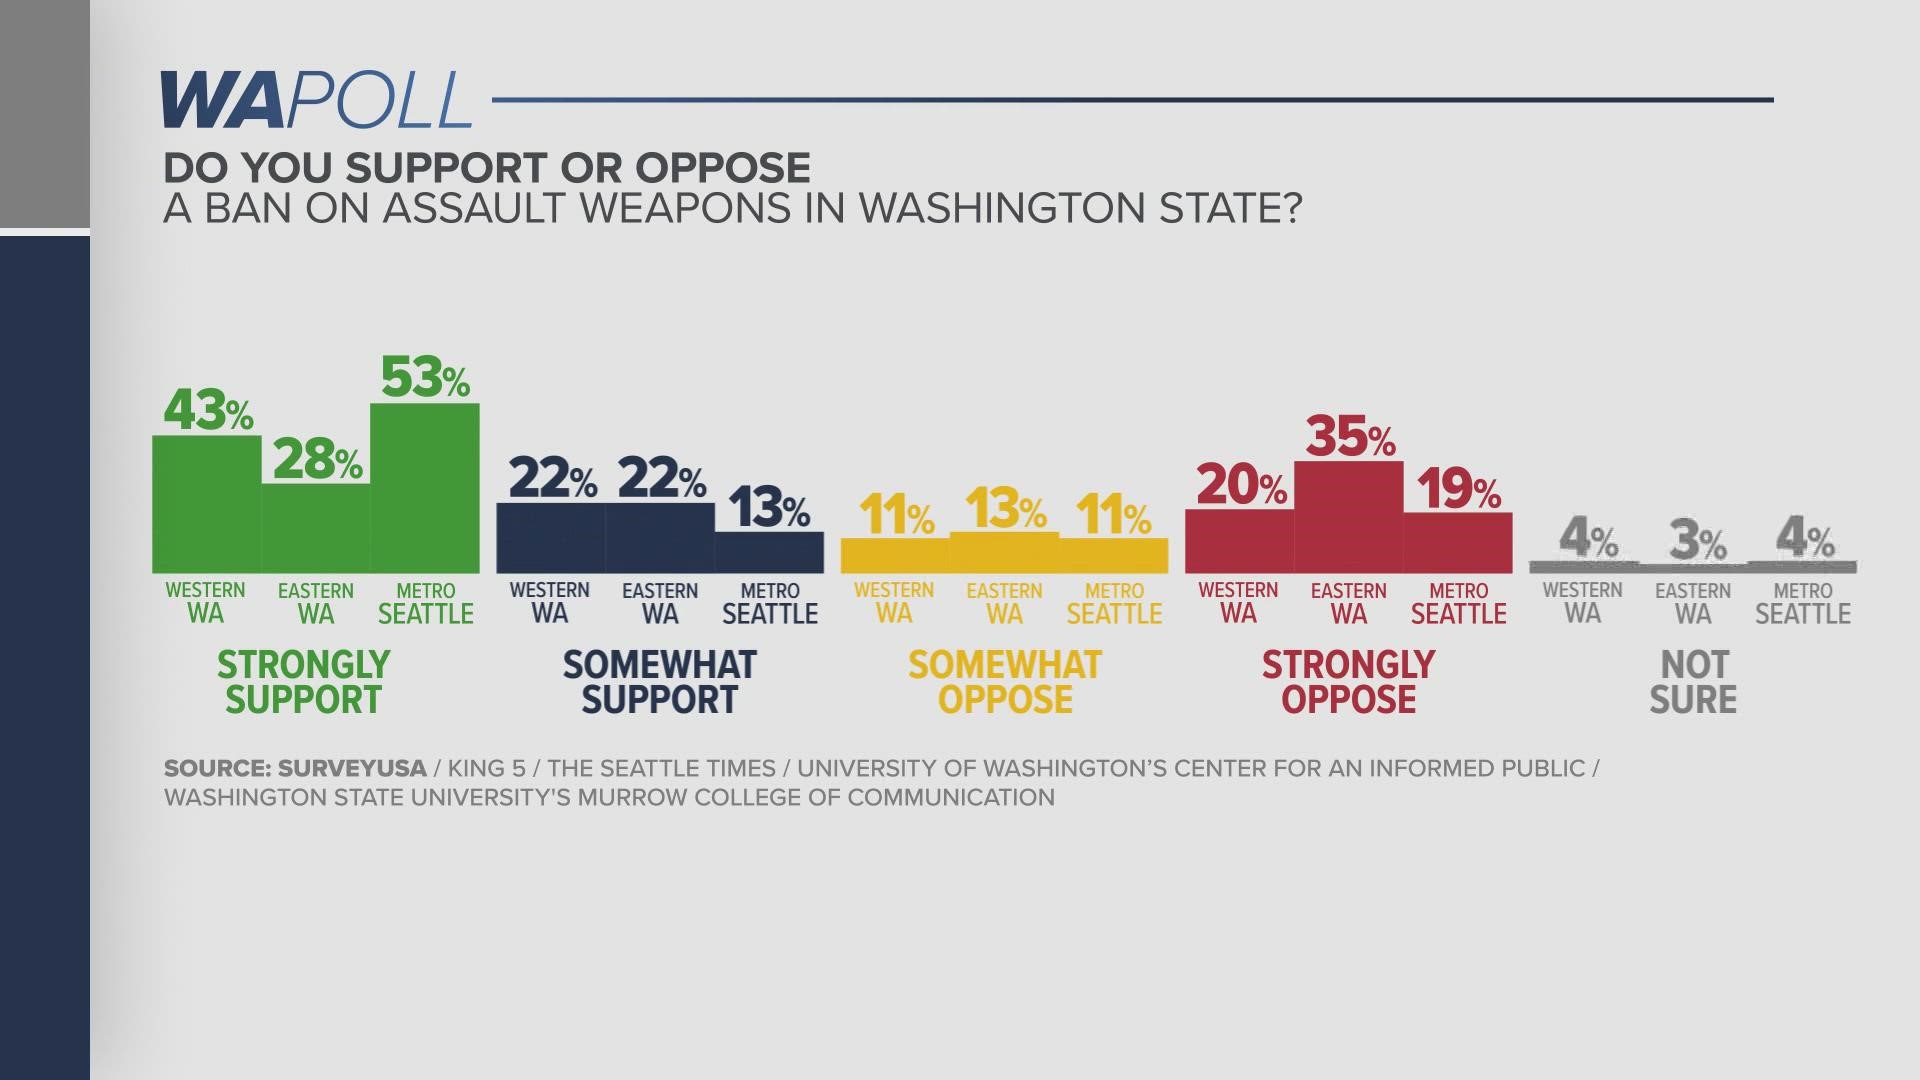 More than half of the people surveyed across Washington state said they support a ban on assault weapons to some degree, according to WA Poll results.